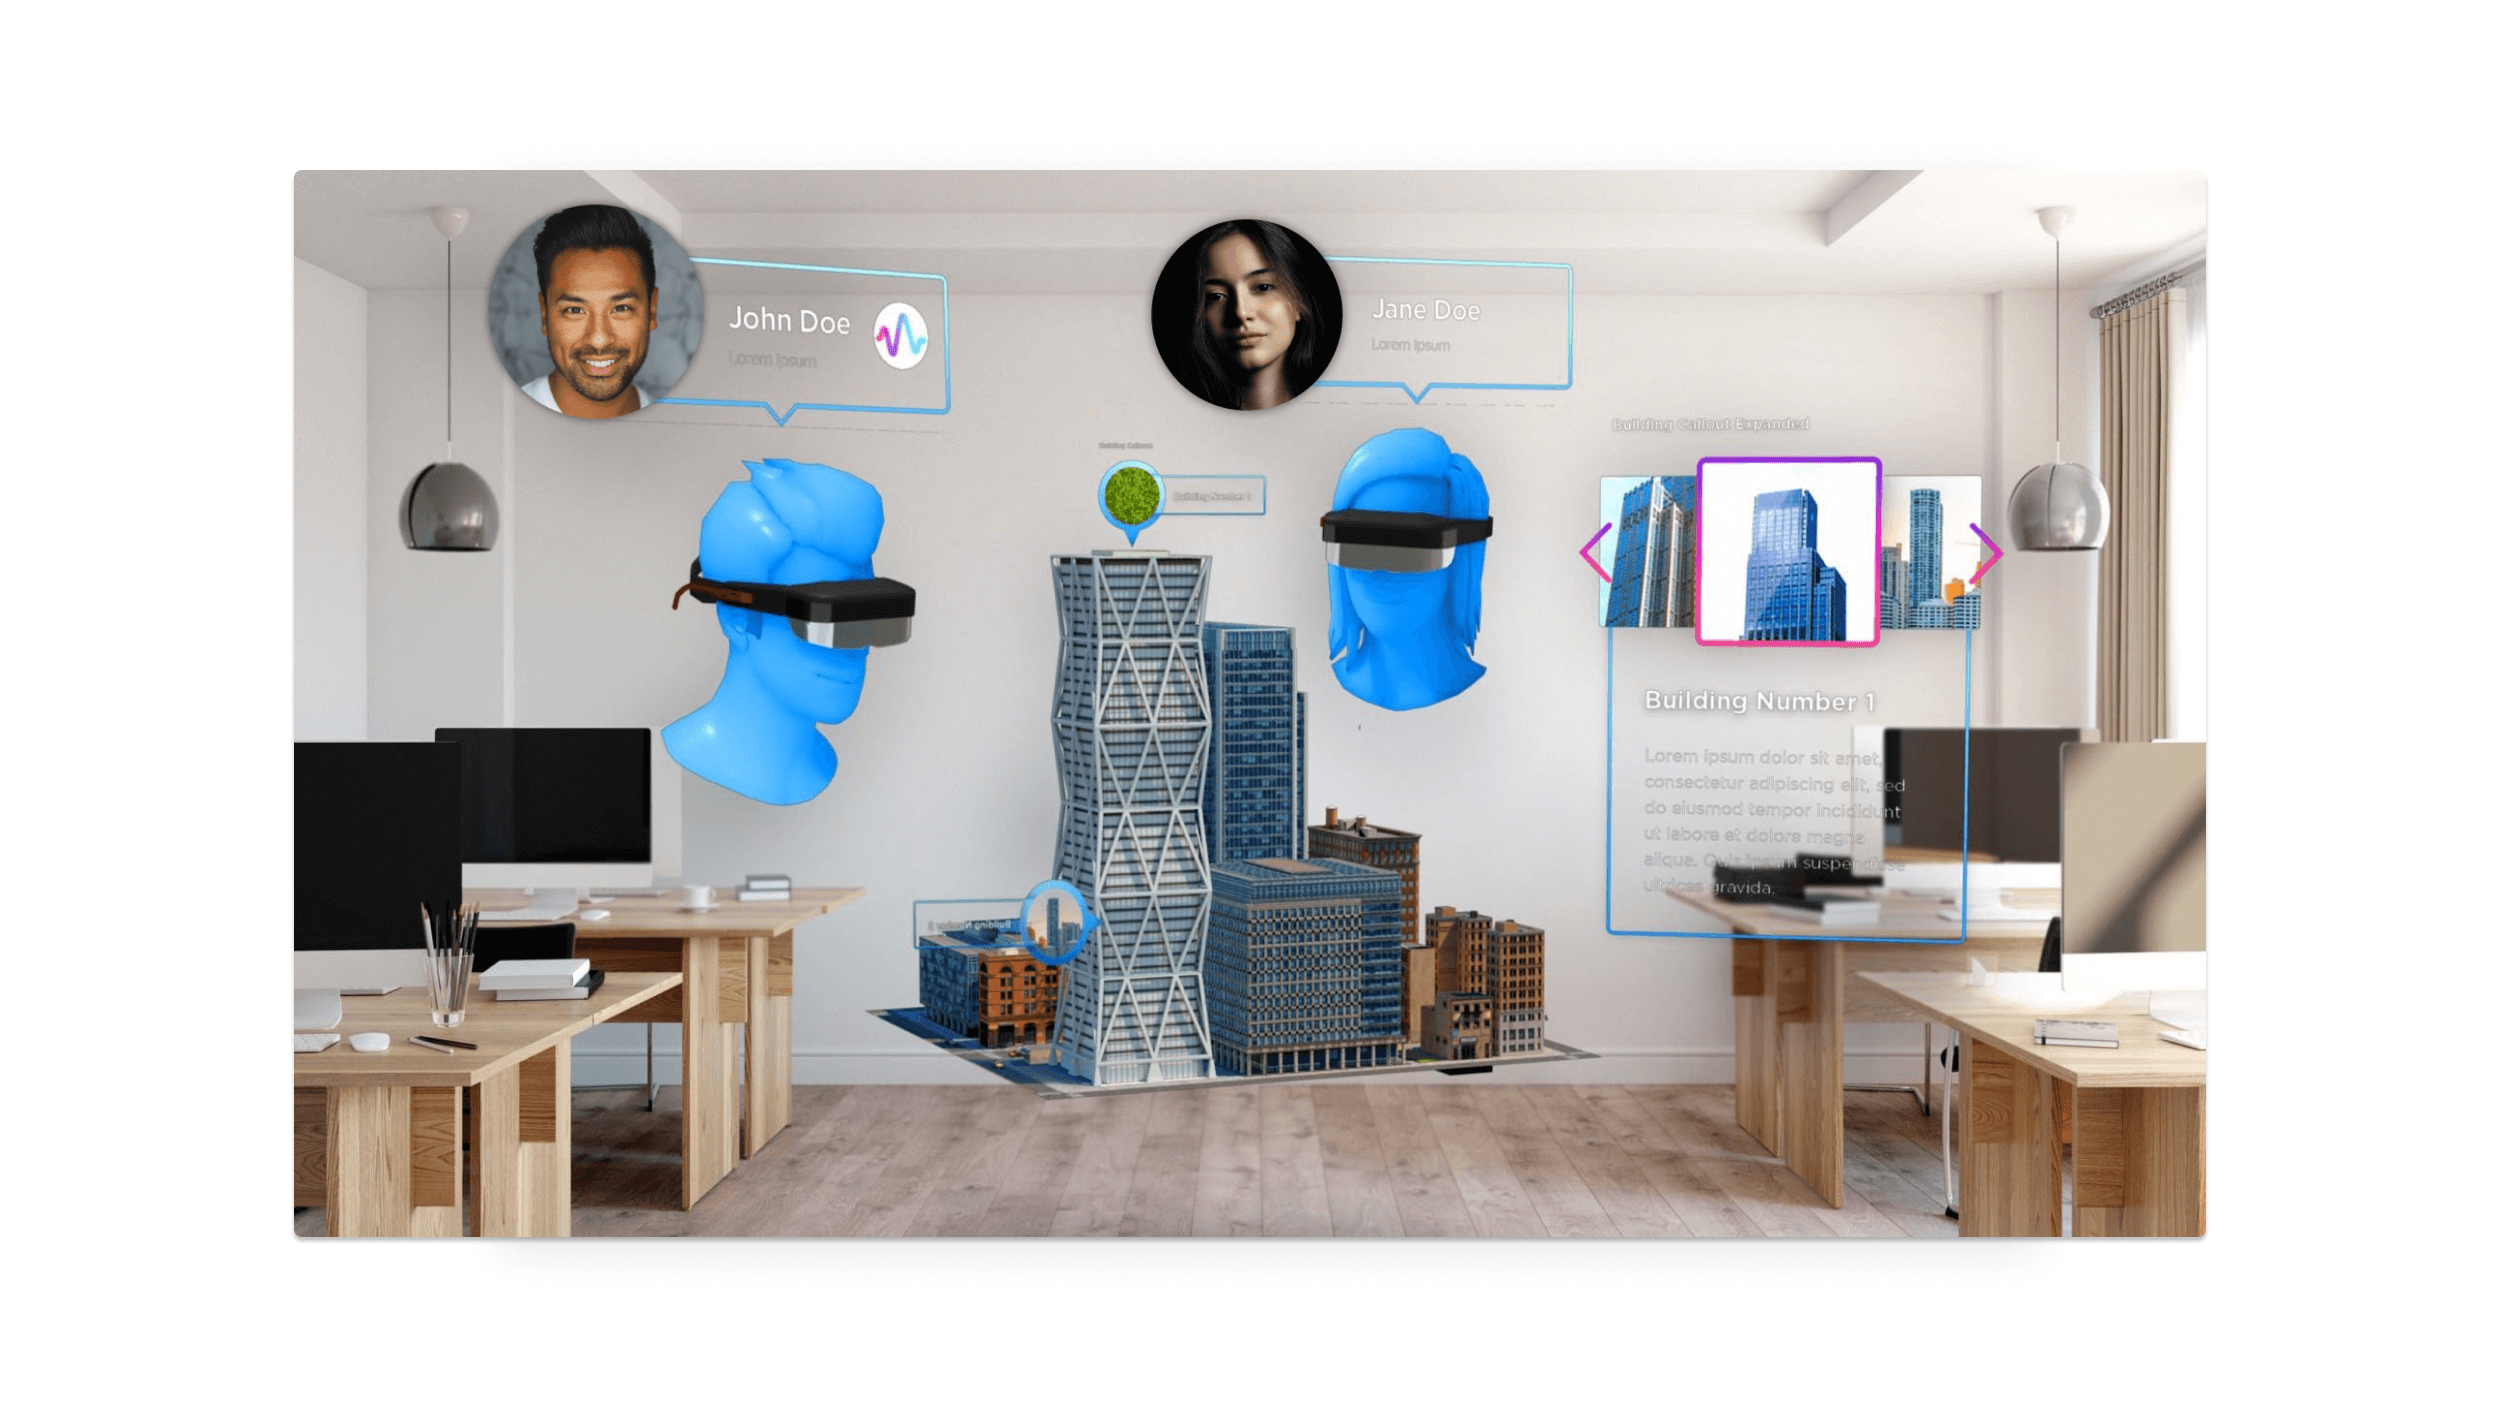 Lenovo - Post Project - AR - Augmented Reality - Users - Conversation - Architecture 